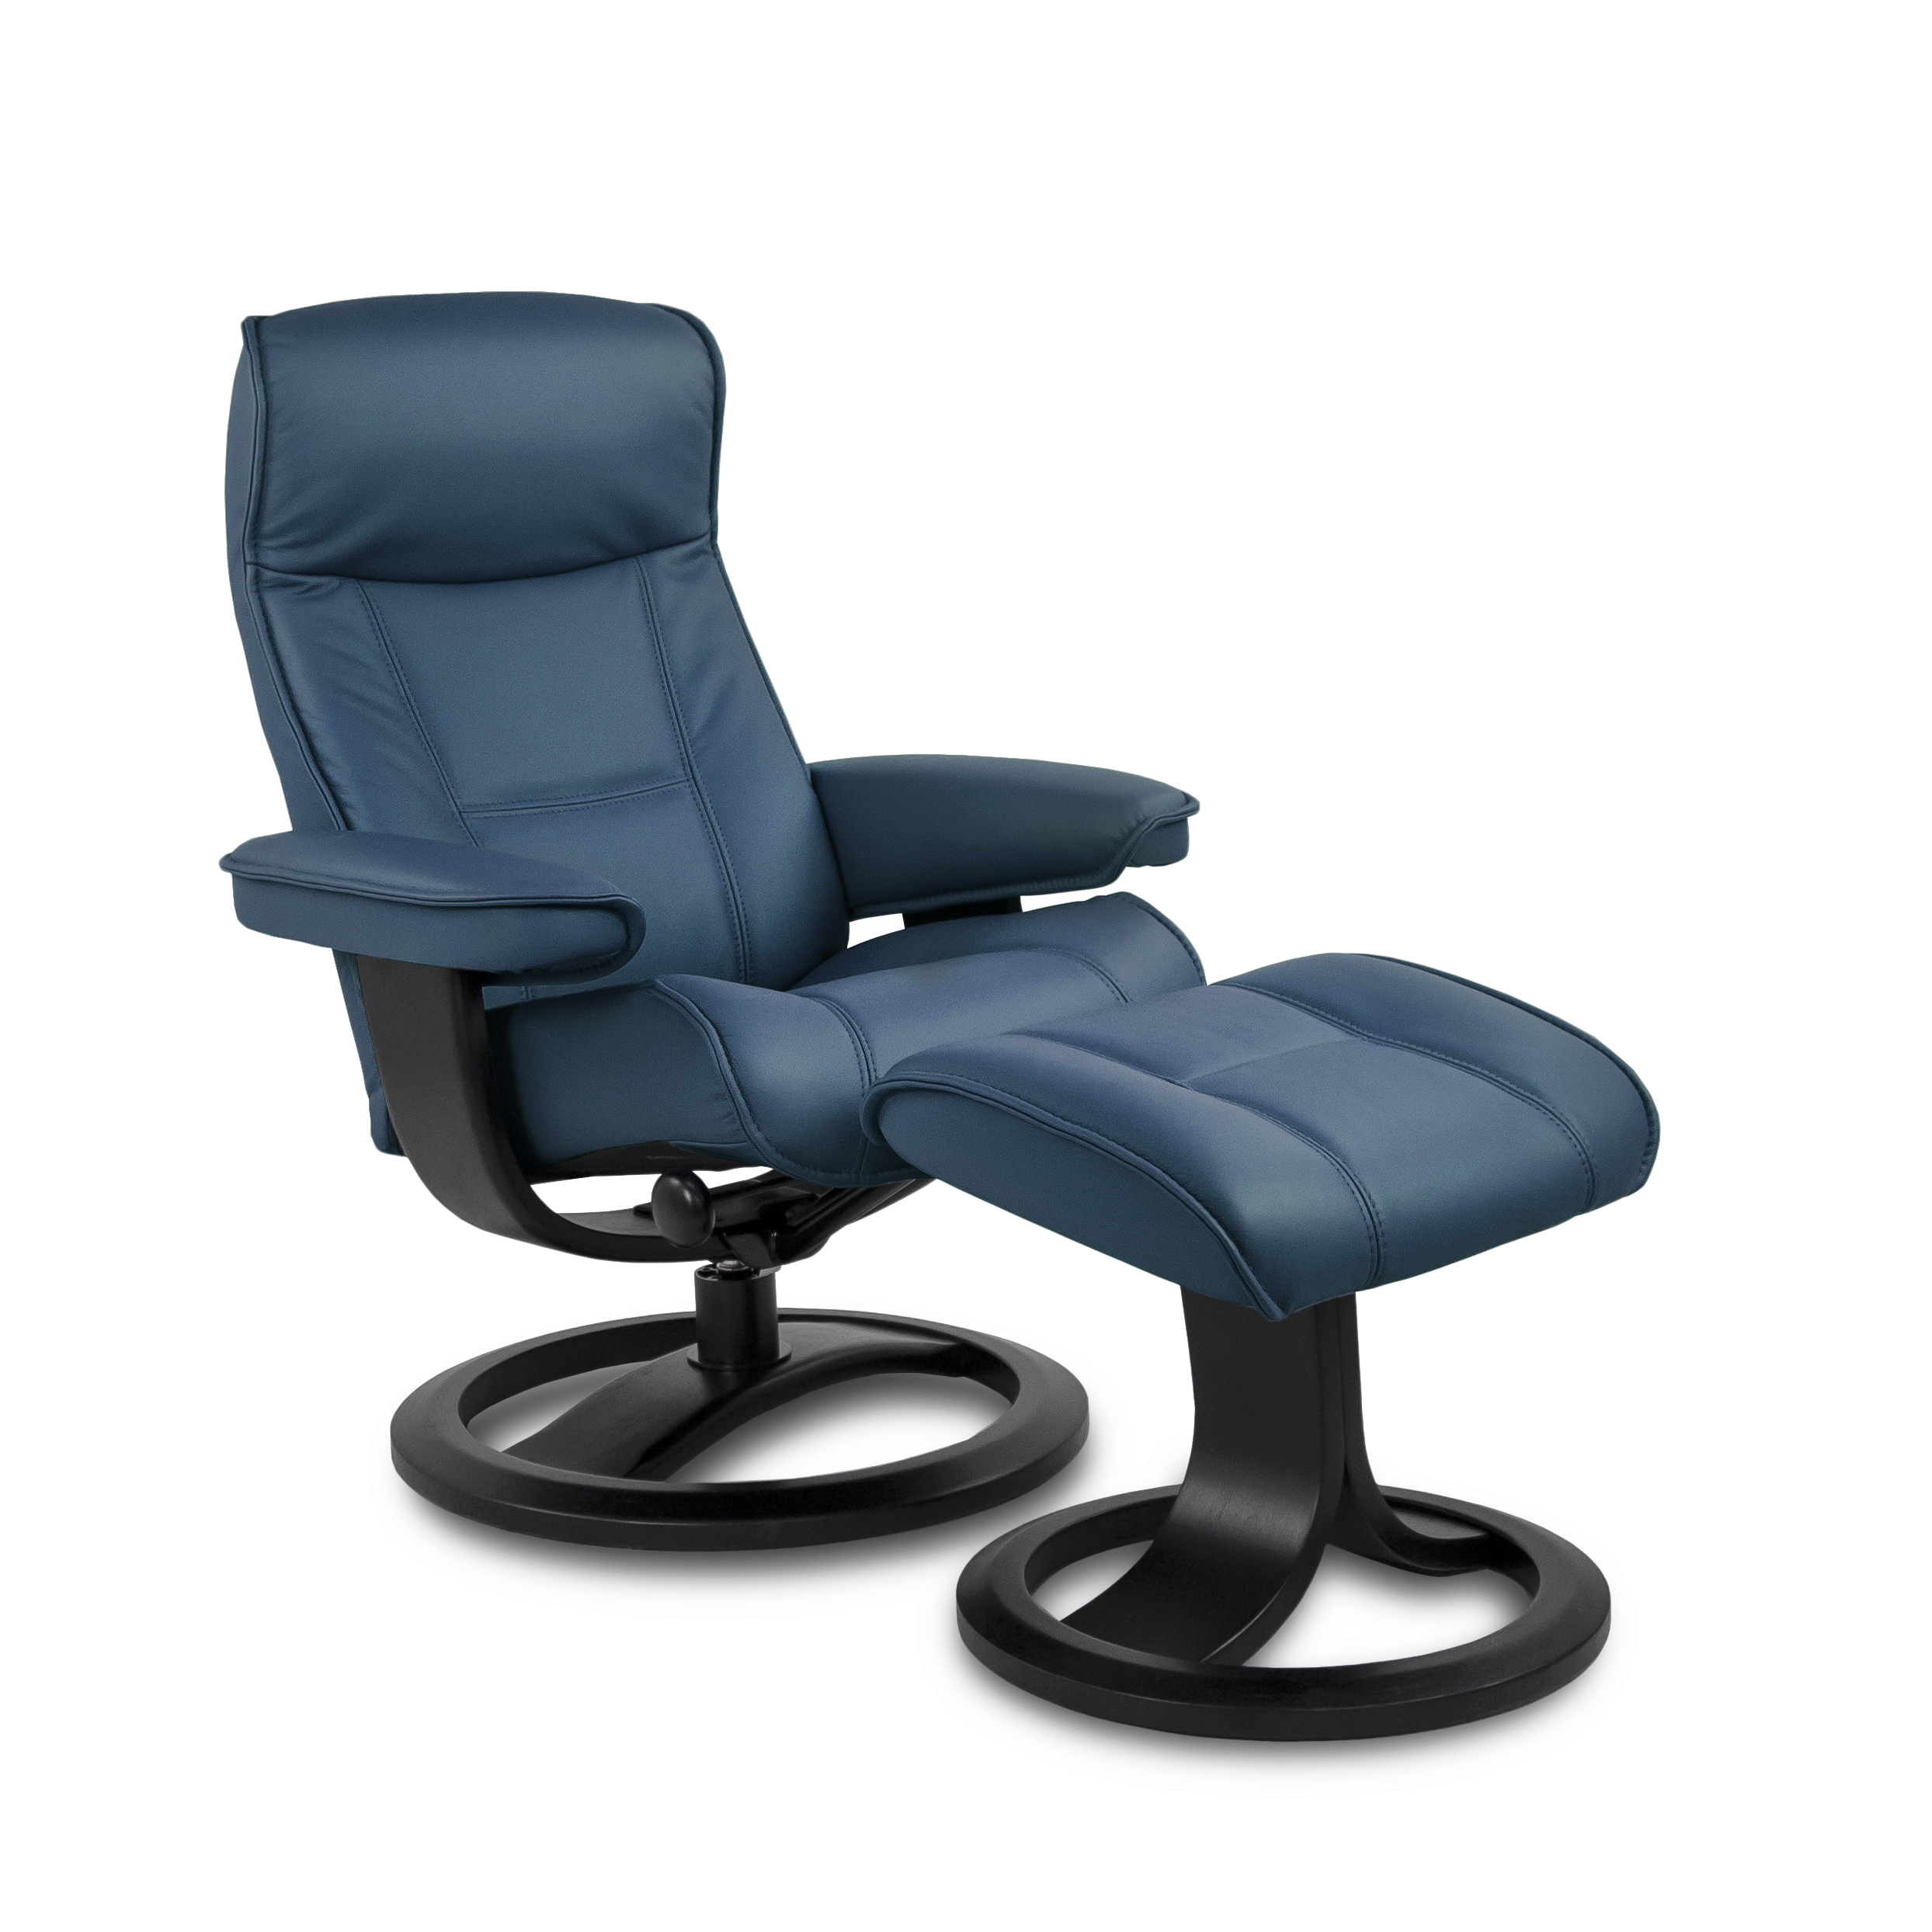 Img Nordic 21 Leather Recliner, Can You Cover A Leather Recliner